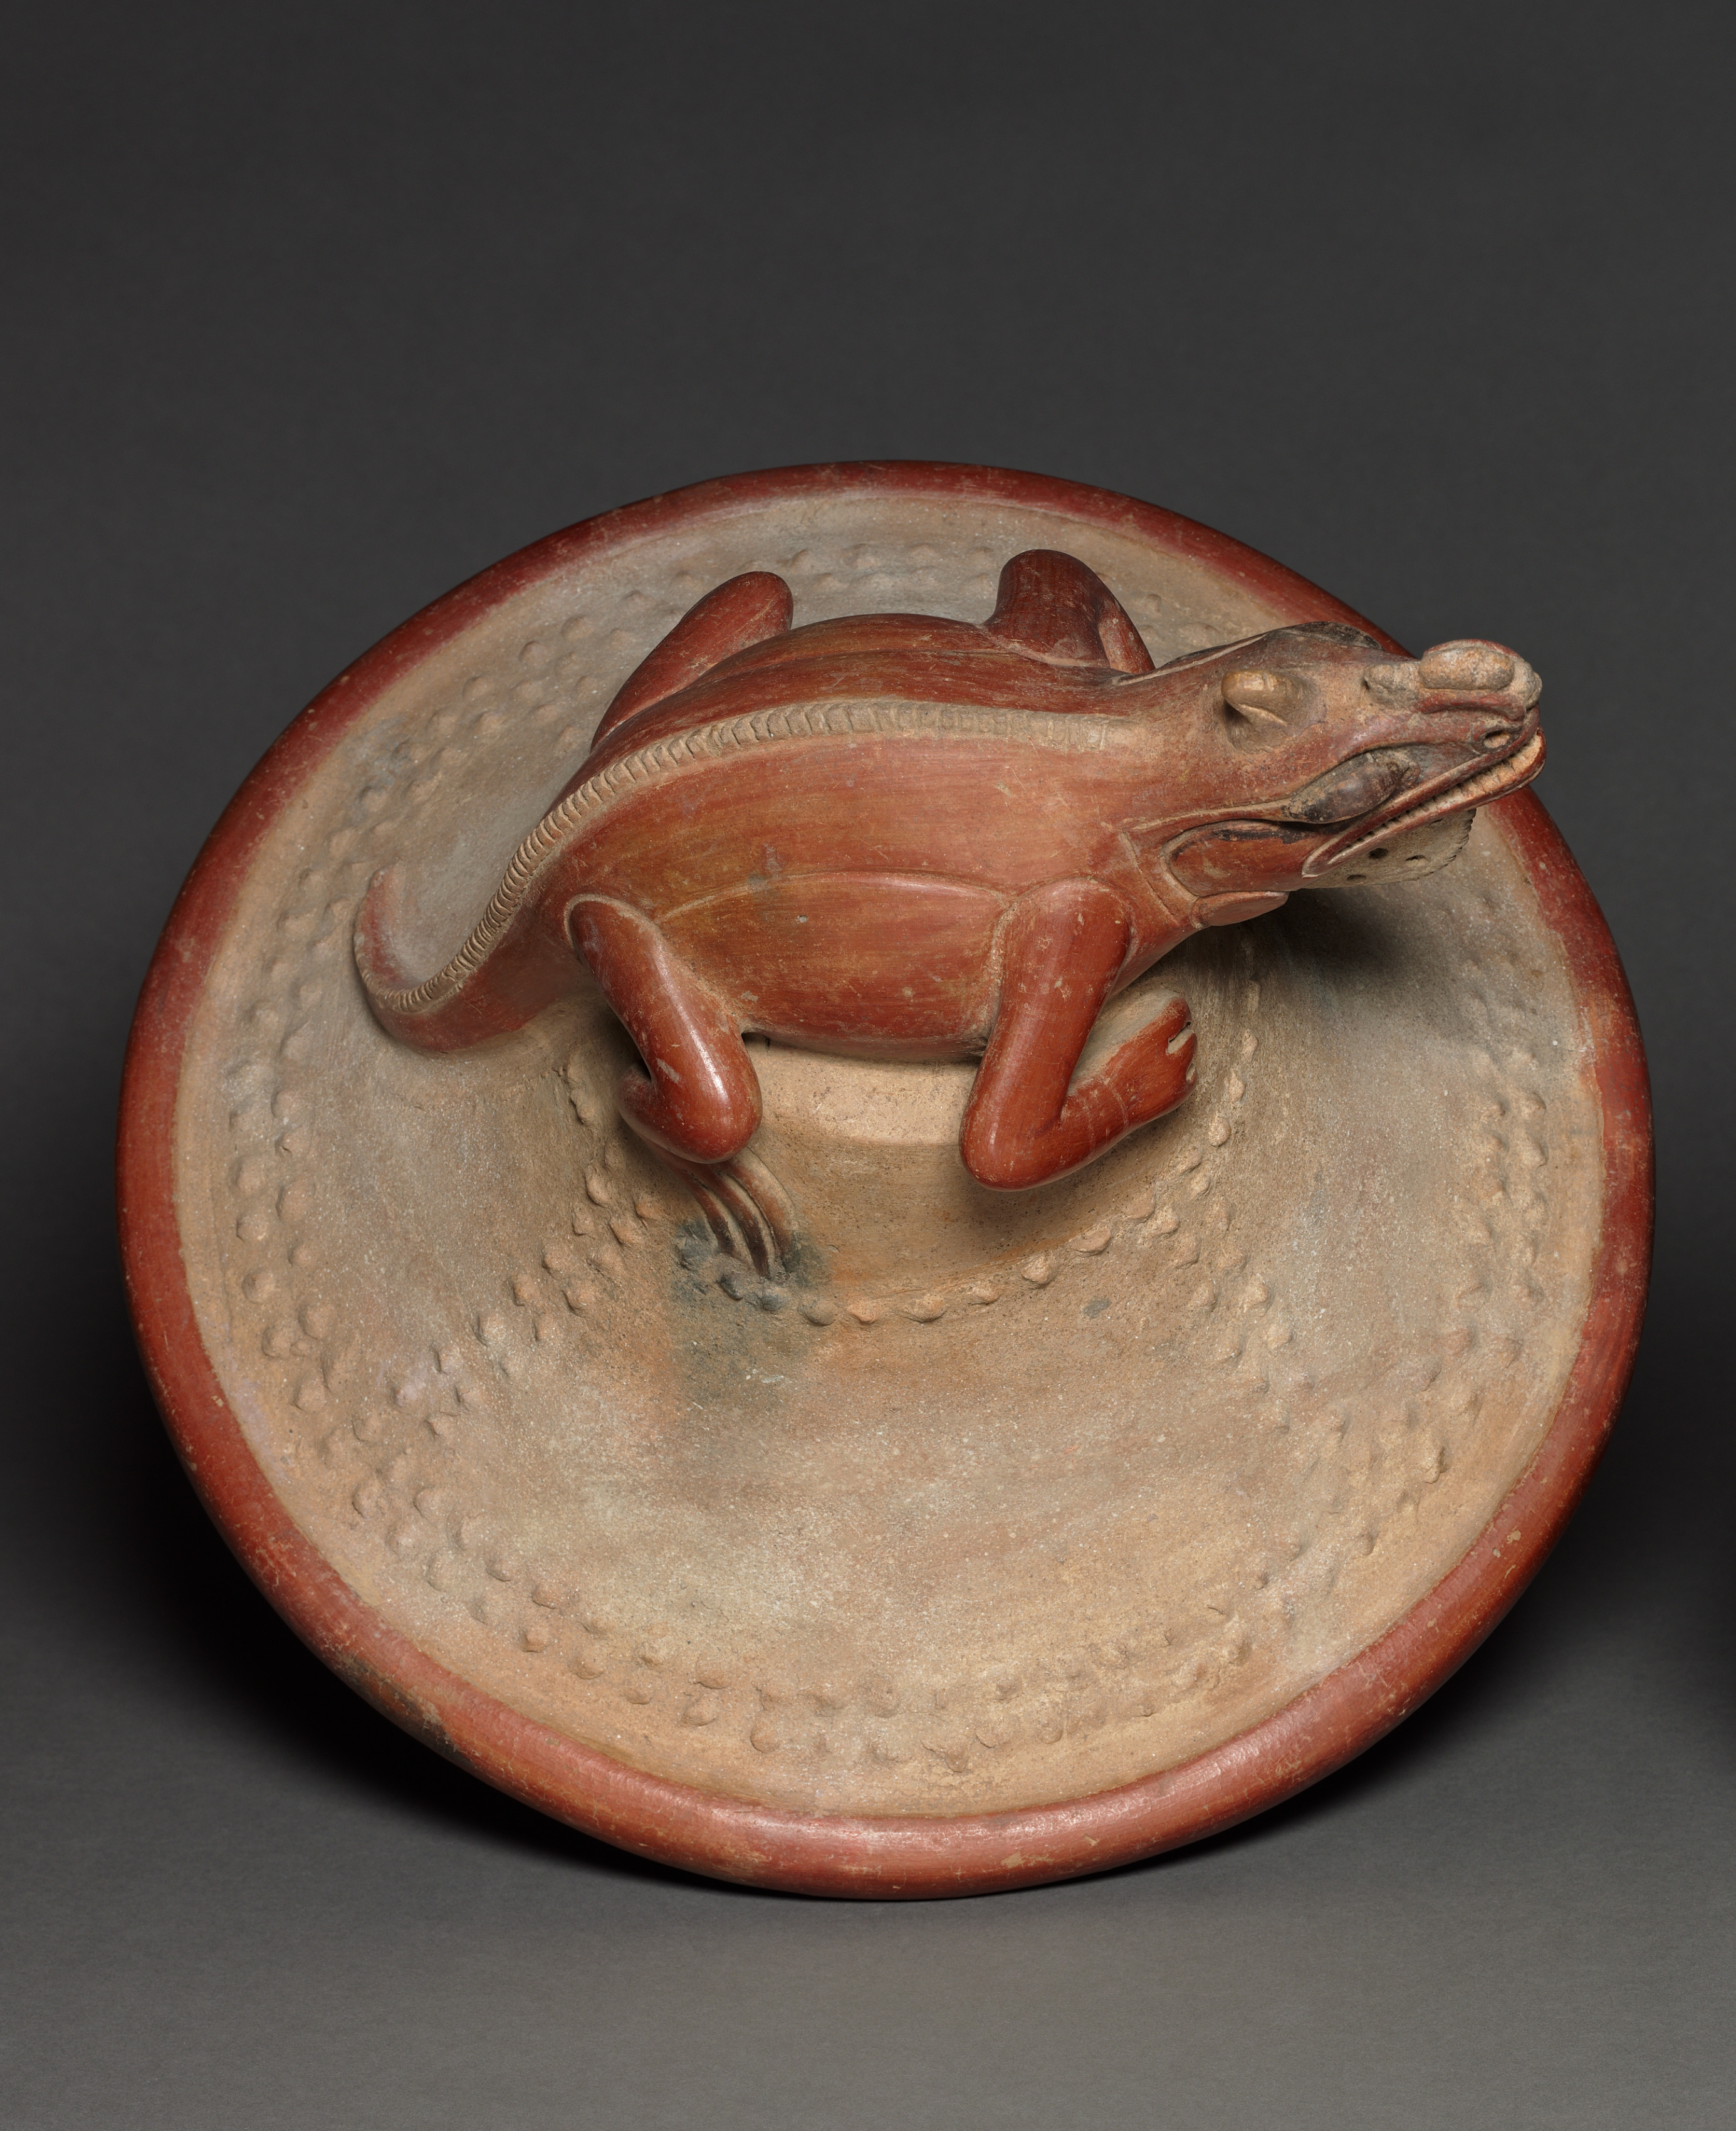 Lid of Bowl with Iguana